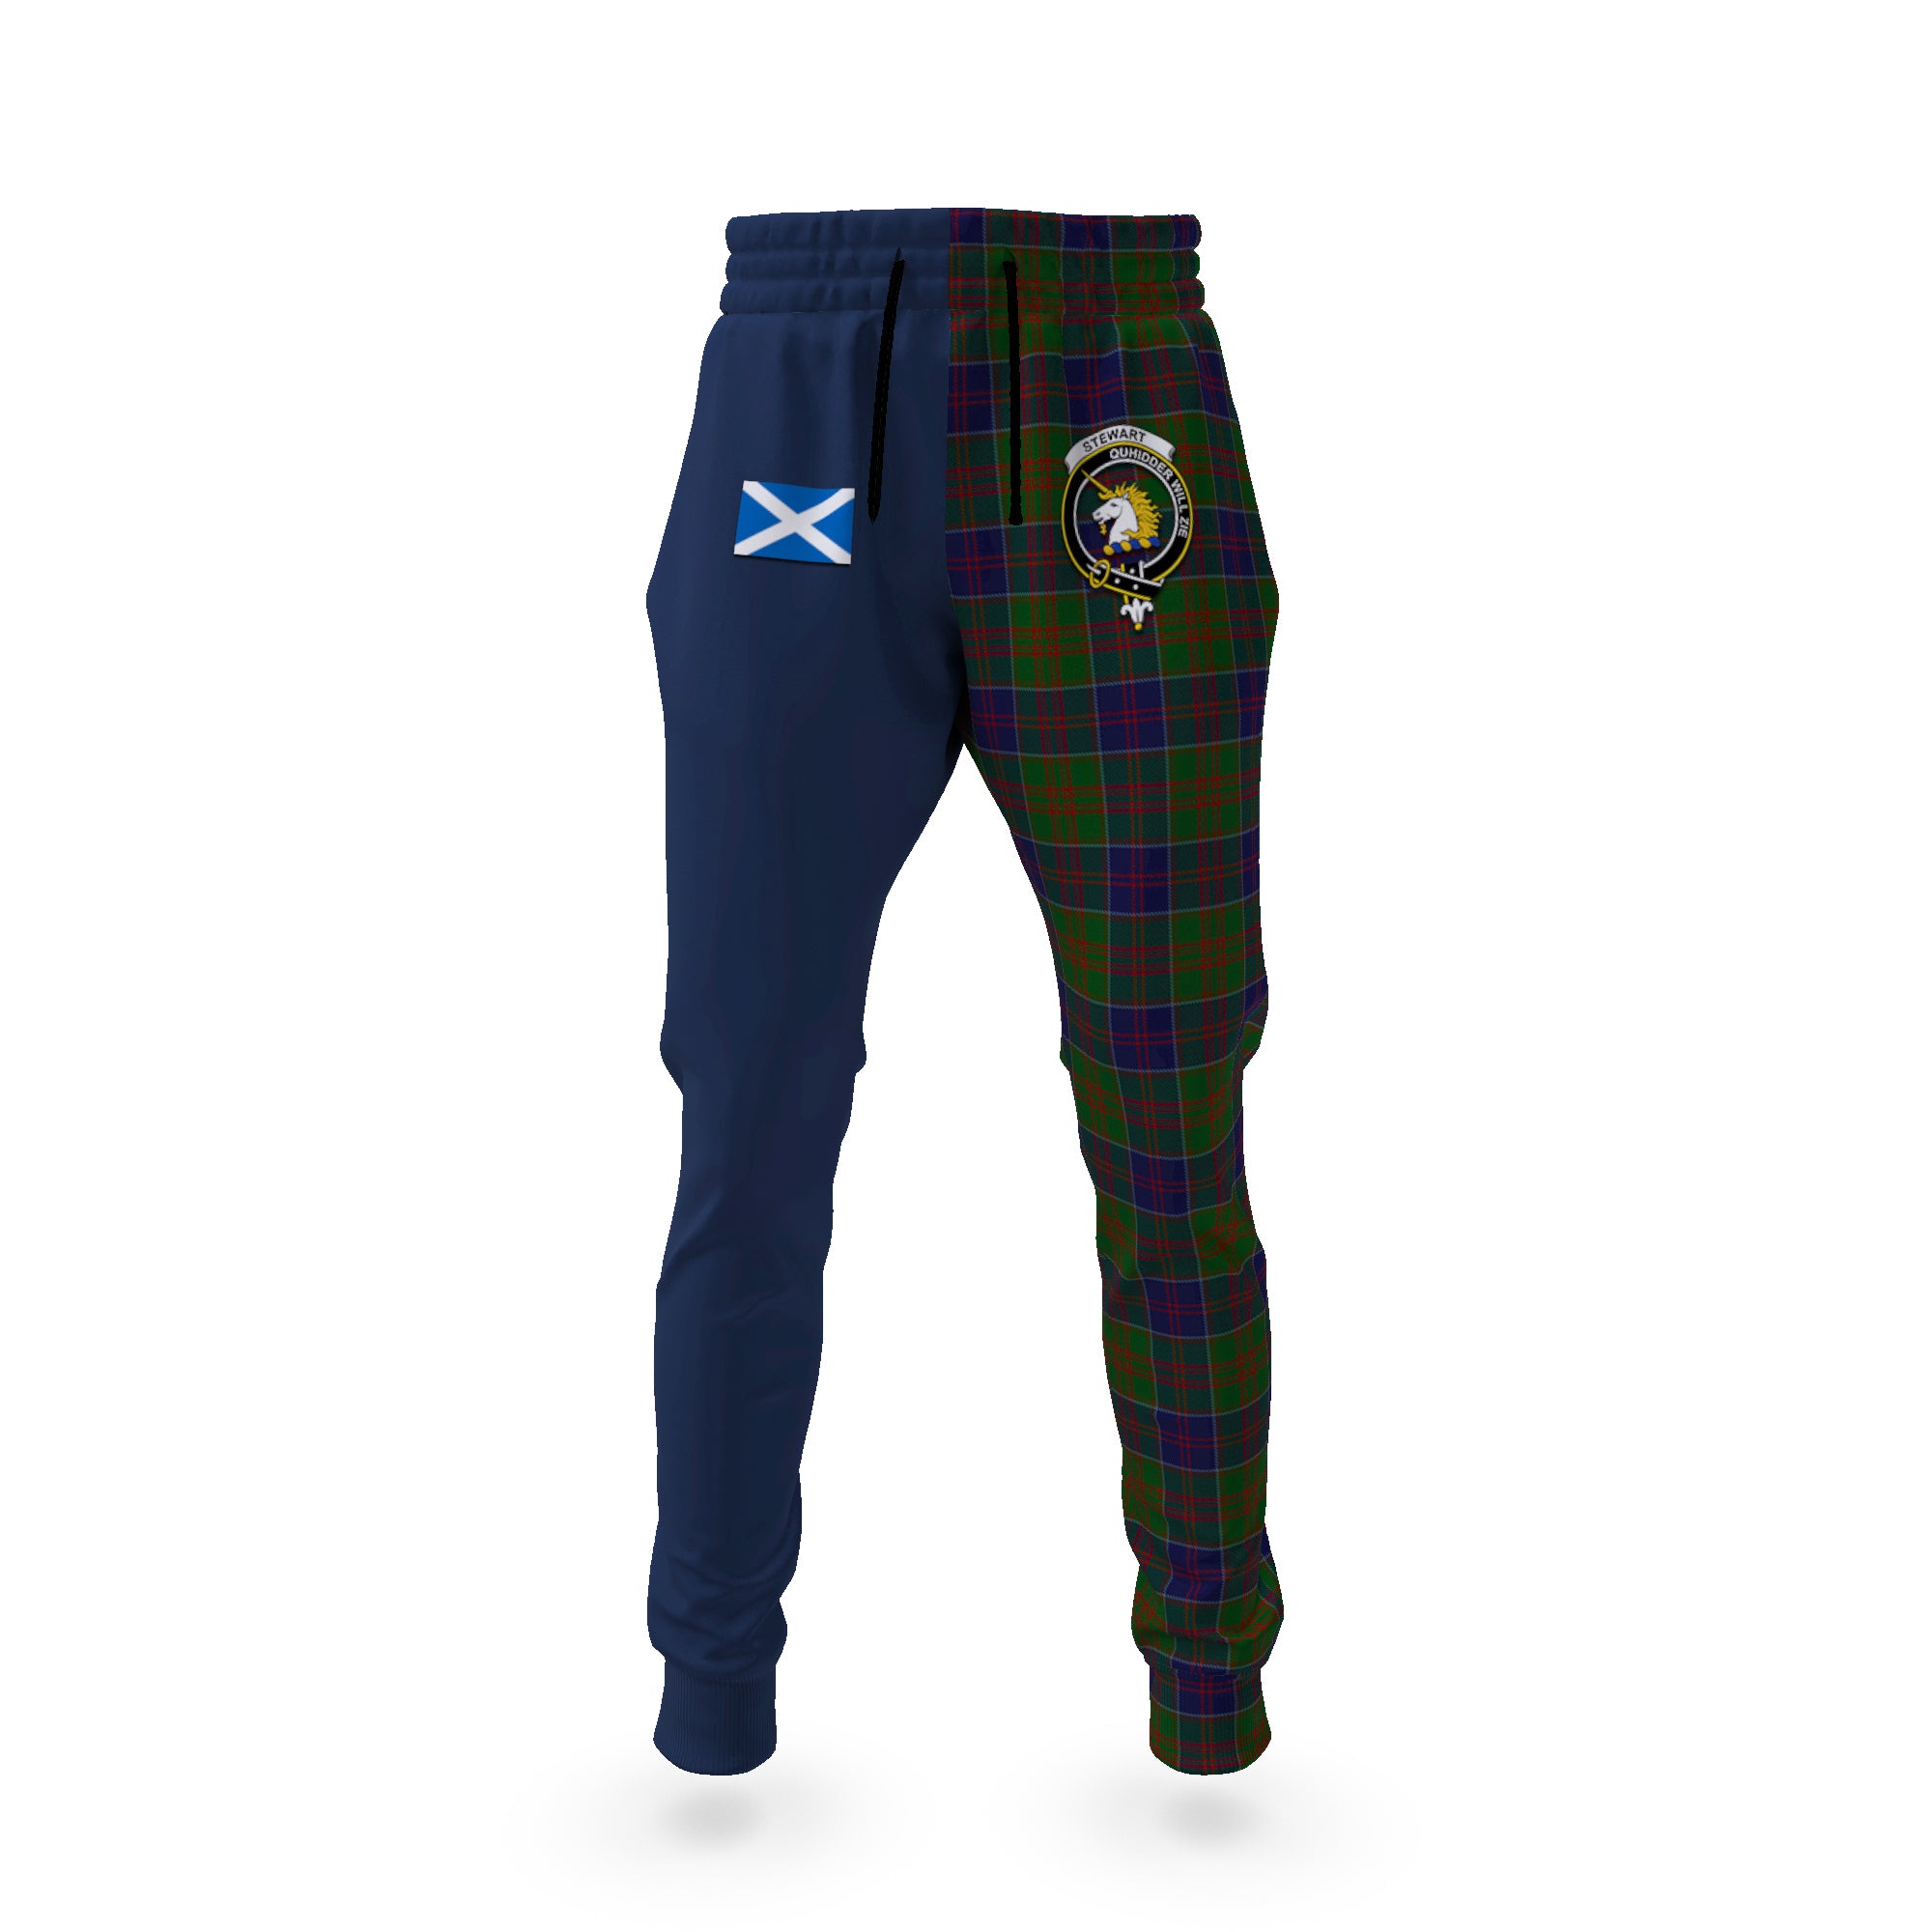 stewart-of-appin-hunting-tartan-plaid-joggers-family-crest-tartan-joggers-with-scottish-flag-half-style